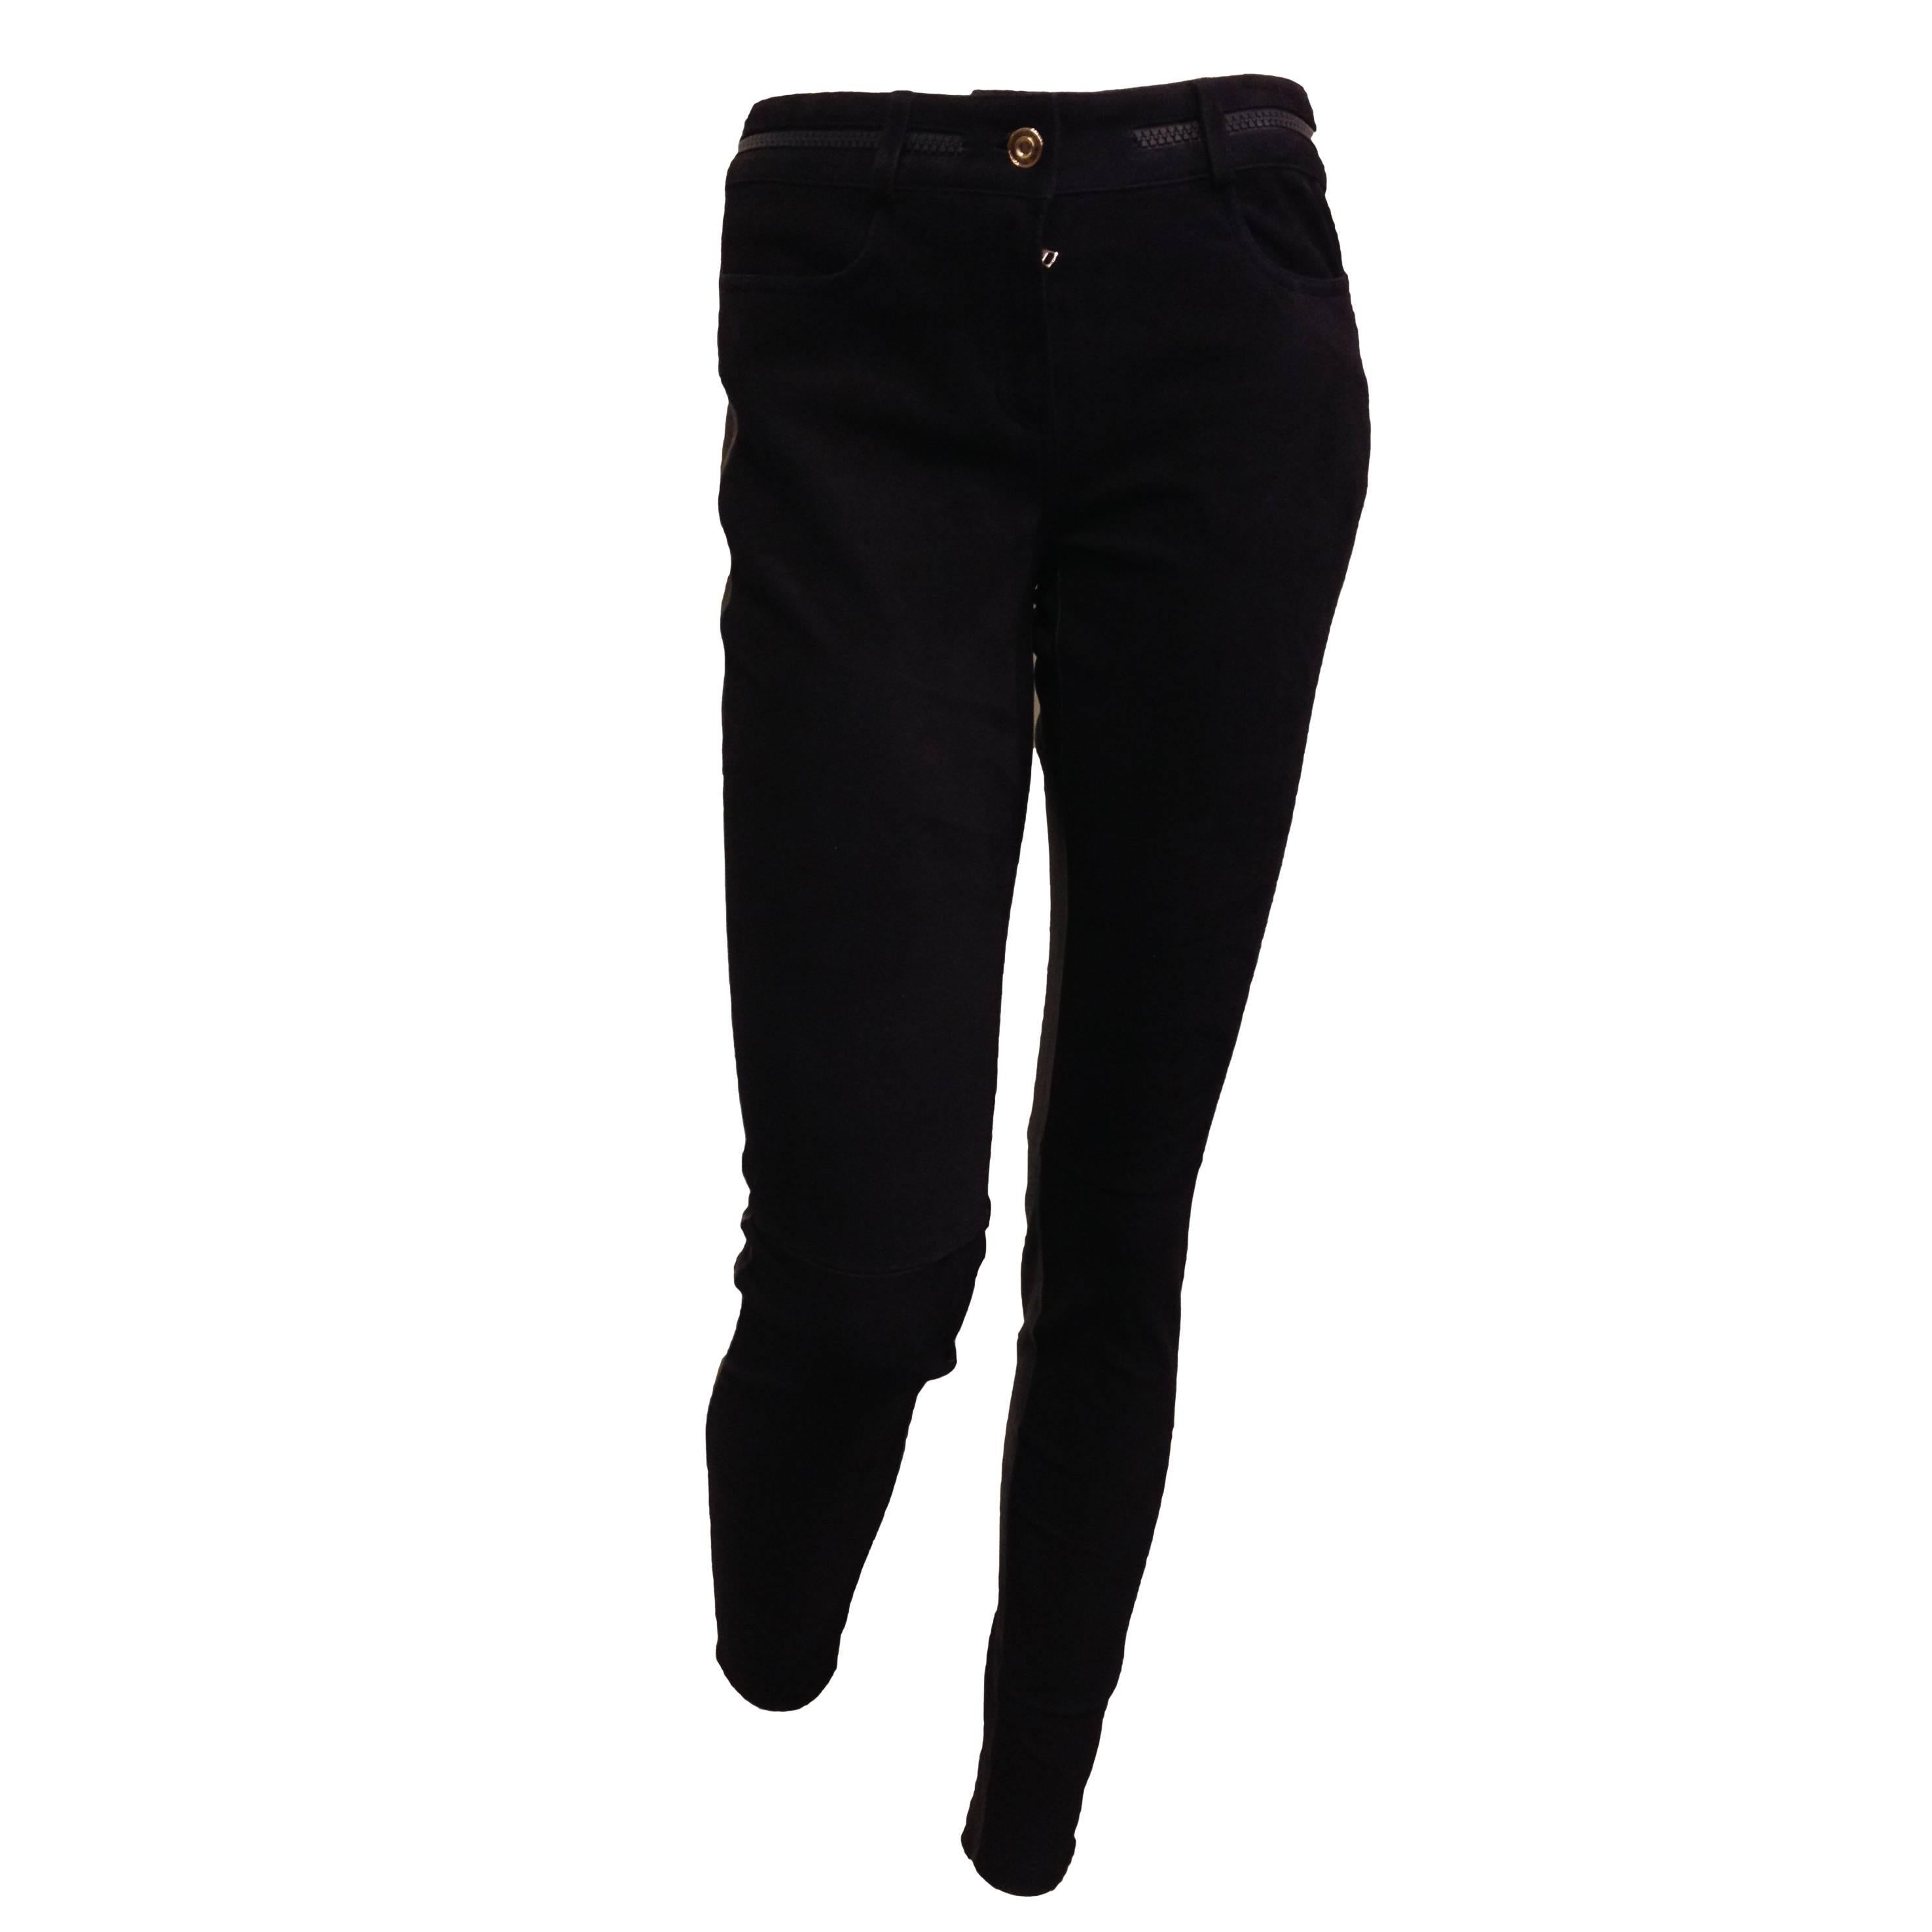 Givenchy Navy Suede and Black Leather Leggings